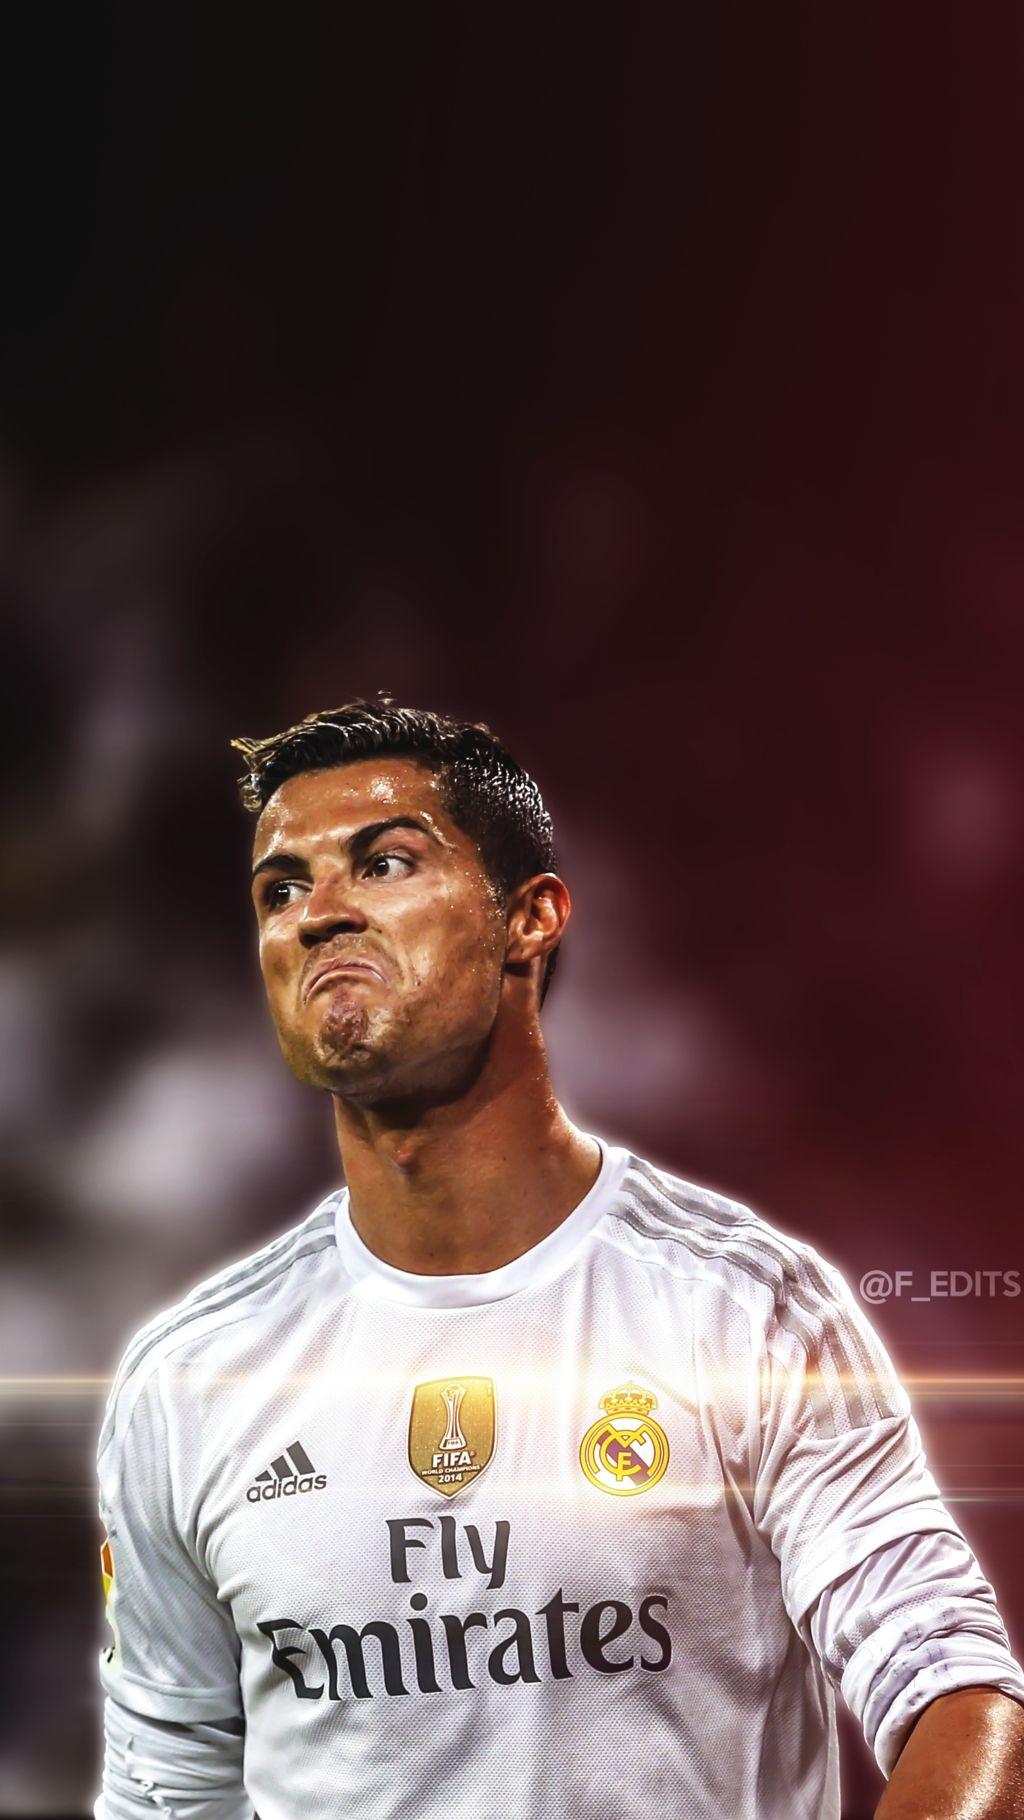 The Best FIFA Cristiano Ronaldo Wallpapers - Wallpaper Cave